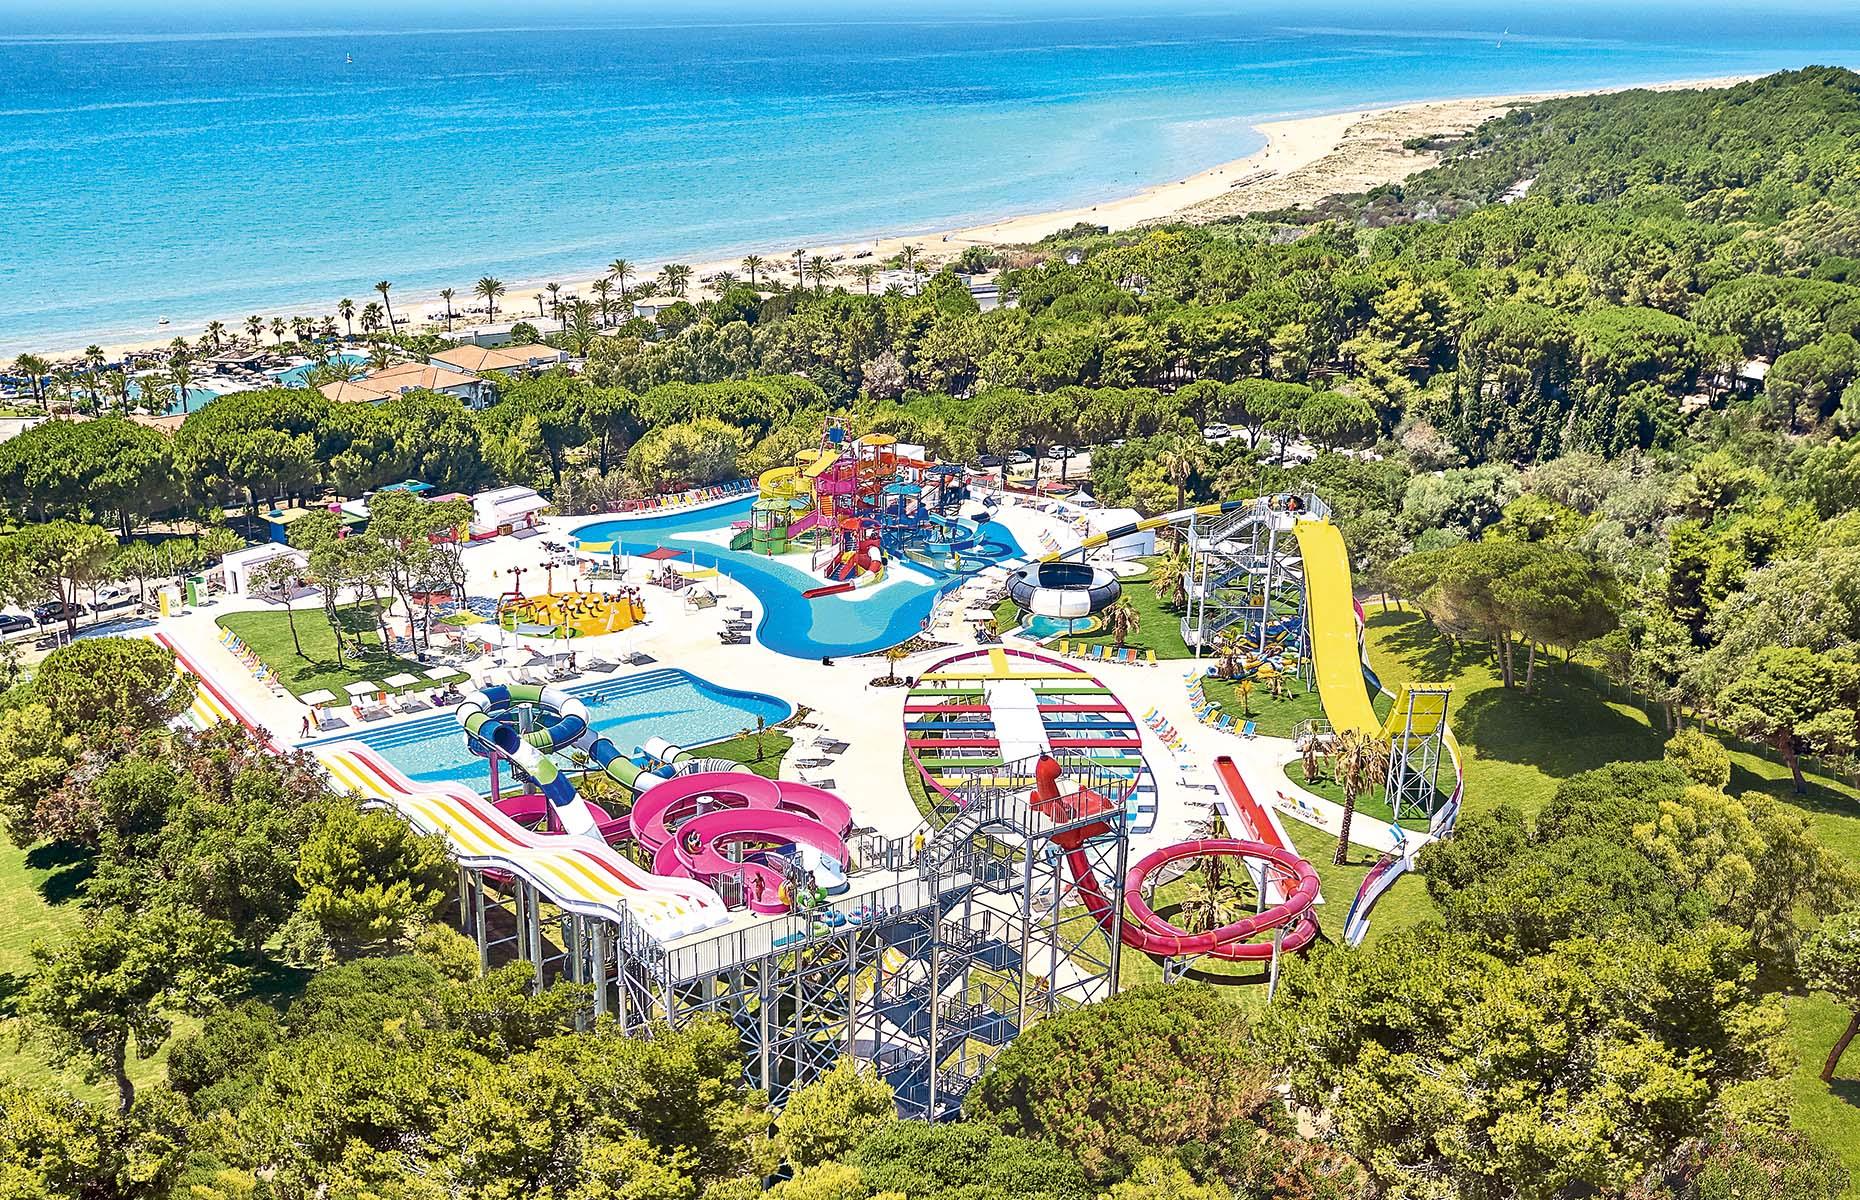 <p>Water fun gets taken up a gear at <a href="https://www.rivieraolympia.com/water-park-hotel.html">this park in the Peloponnese</a> that's perfect for thrill-seekers. Aside from a whole host of water slides, you can test your mettle on rides such the Looping Rocket where you'll be blasted 65 feet (20m) into the sky from a launch capsule. Take the plunge down the high-speed Space Ride or drop into the darkness of the Black Hole. There's also a Greek gods-inspired children's play area. </p>  <p><a href="http://www.loveexploring.com/galleries/82982/the-worlds-most-spectacular-water-displays?page=1"><strong>Big water fan? Now discover the world's most spectacular water displays</strong></a></p>